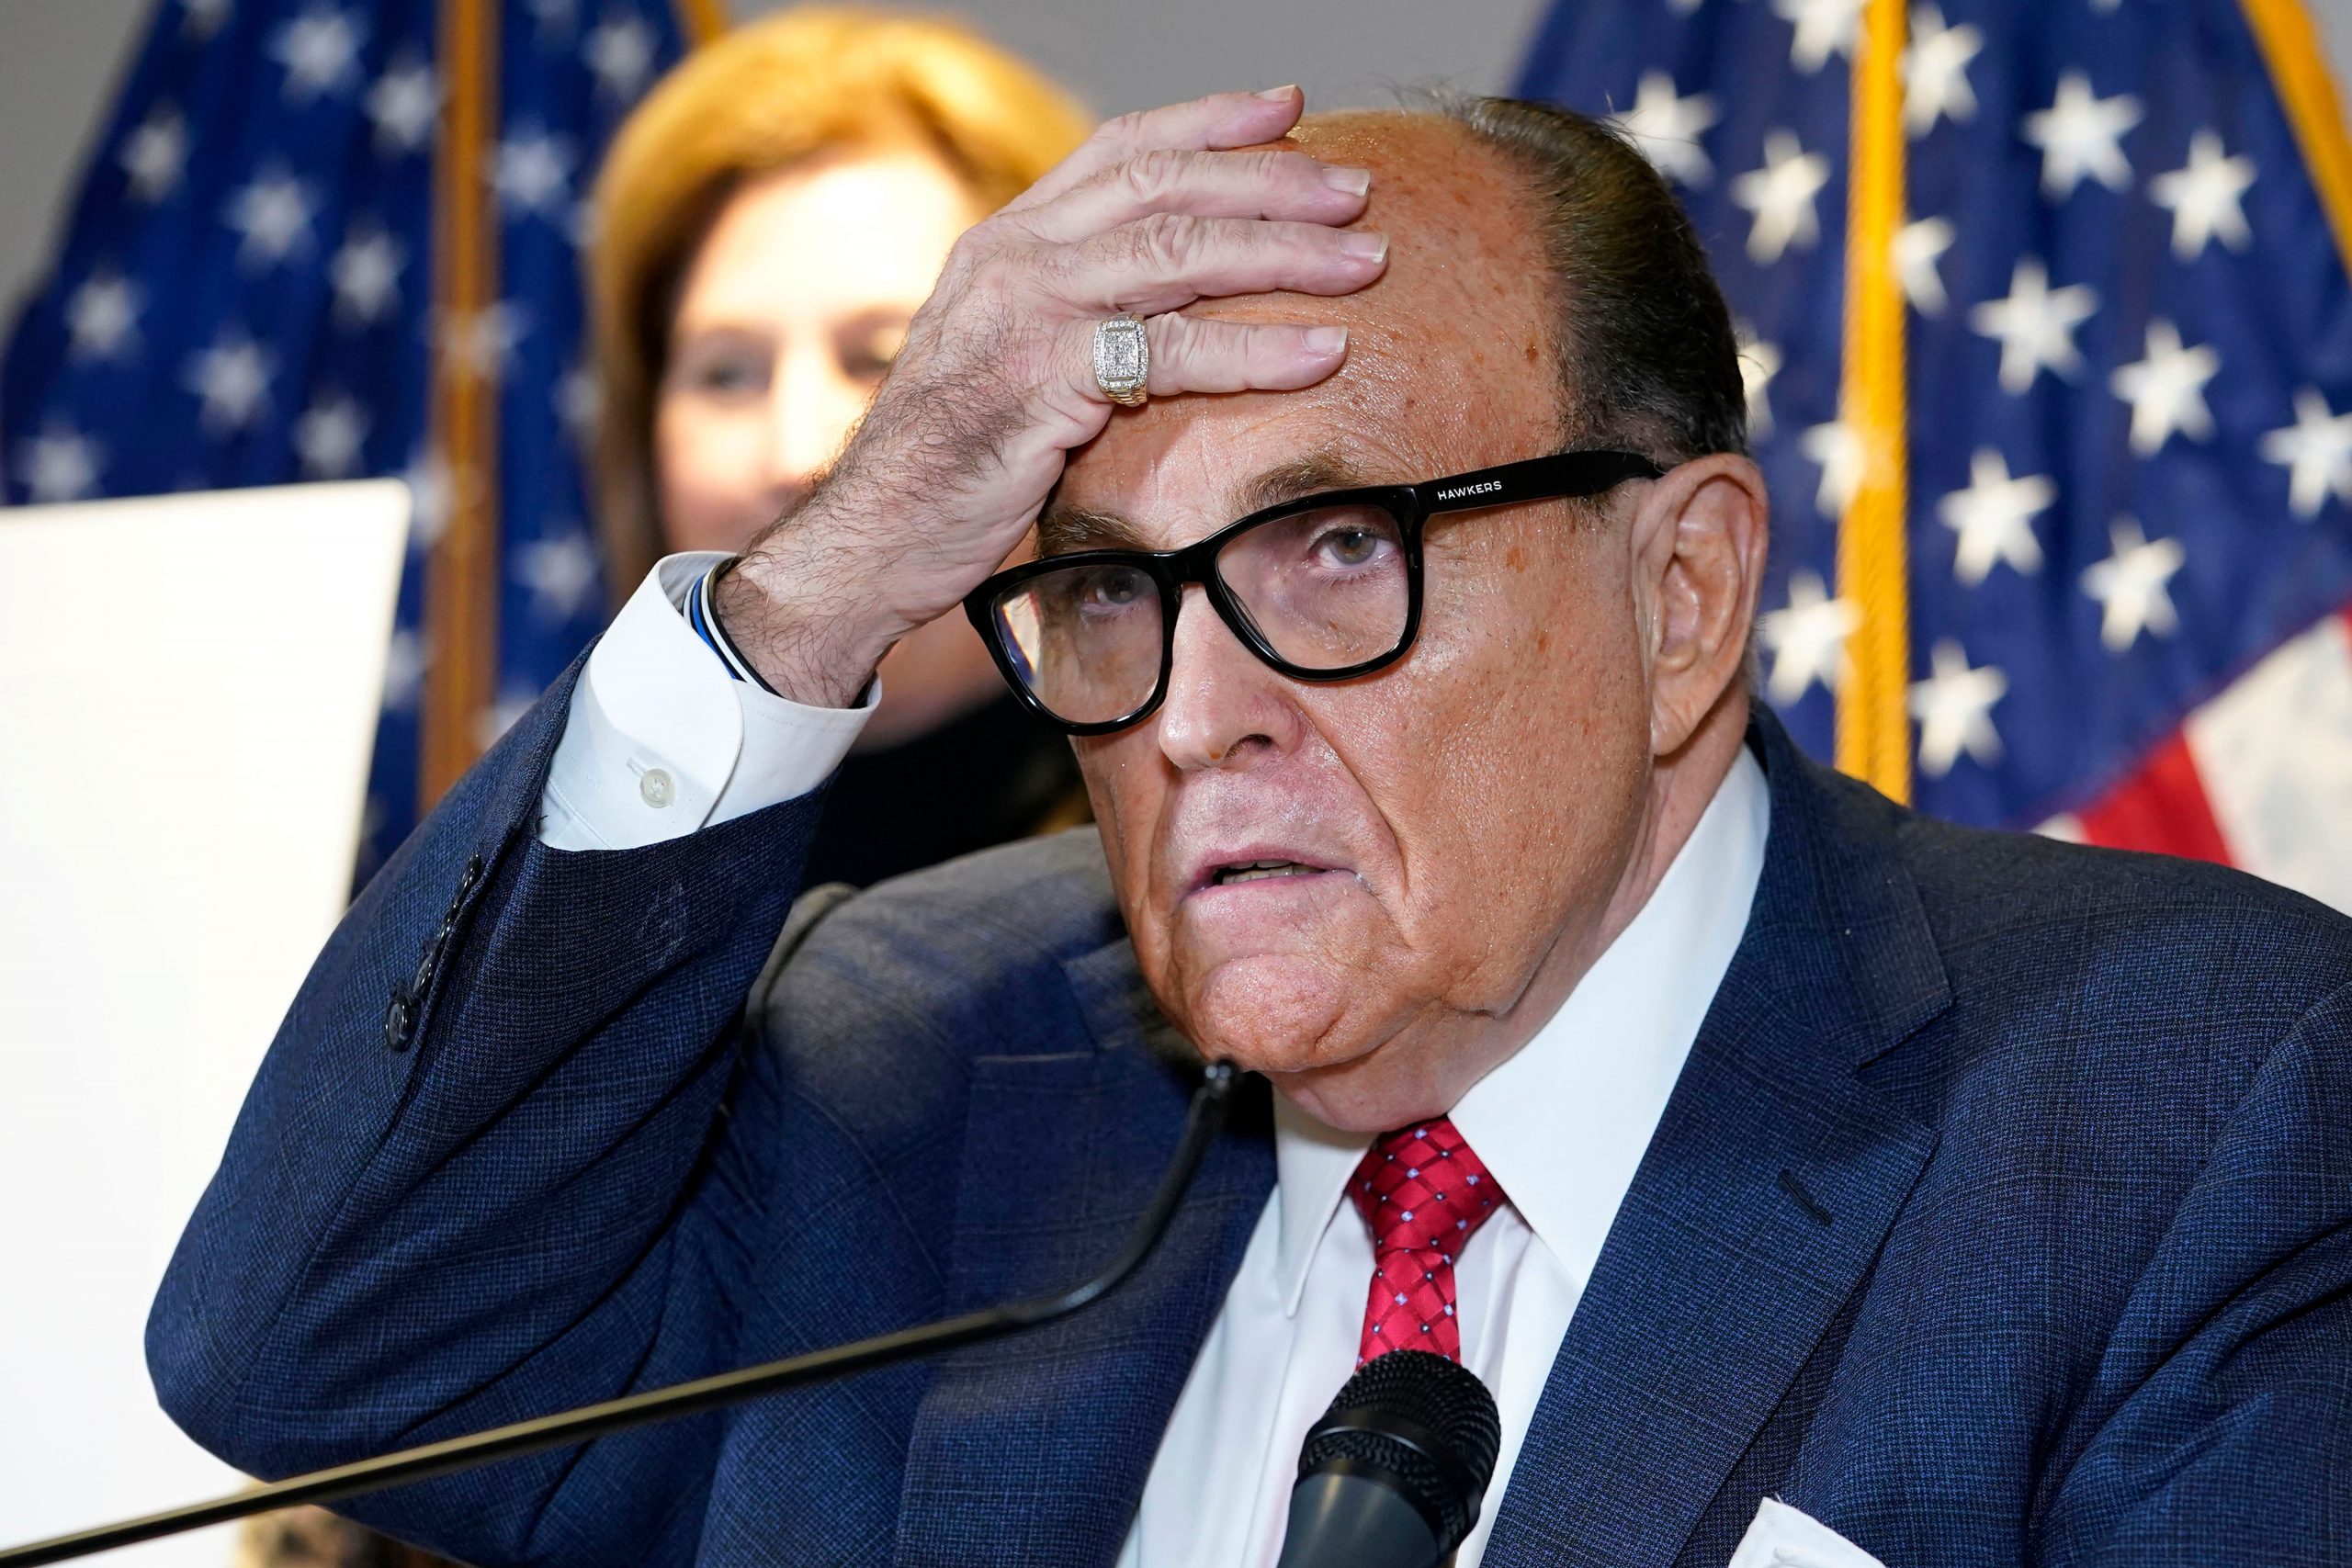 January 6 committee issues subpoenas to Rudy Giuliani, 3 others